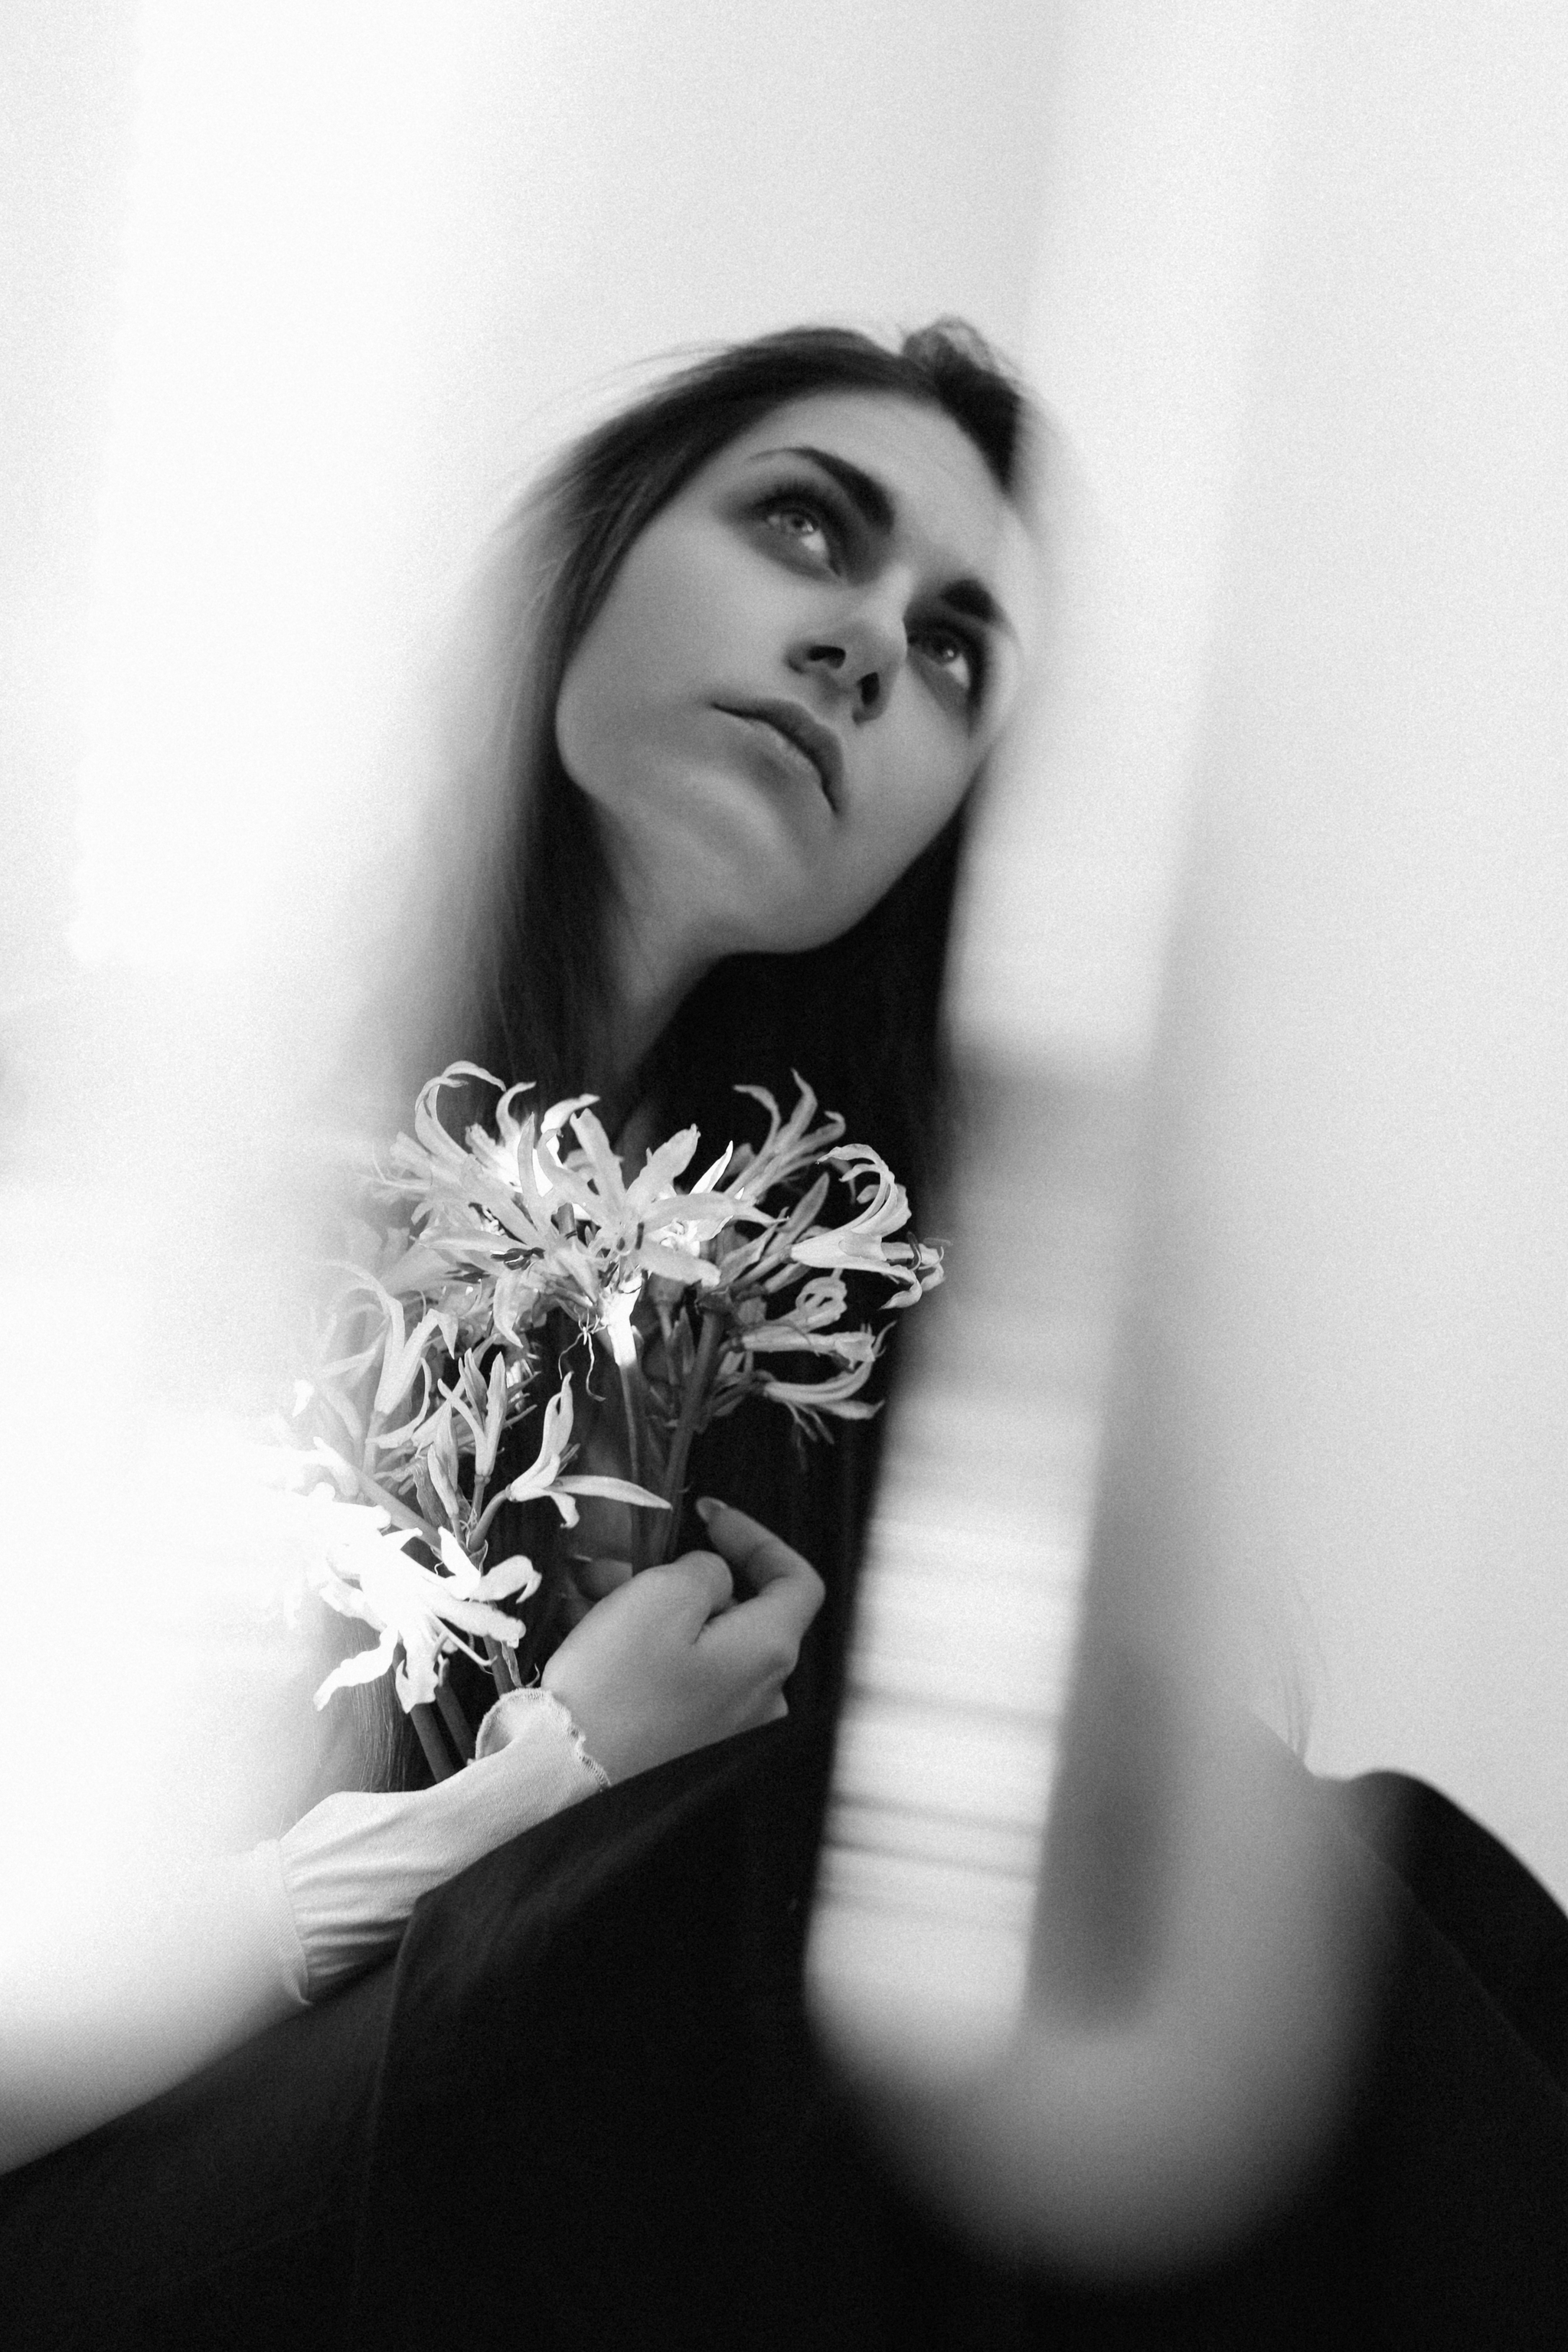 Fresco in the kitchen - My, Kitchen, PHOTOSESSION, The photo, Black and white photo, Flowers, Black and white, Girls, Beautiful, , Music, Musicians, Long hair, Fresco, Longpost